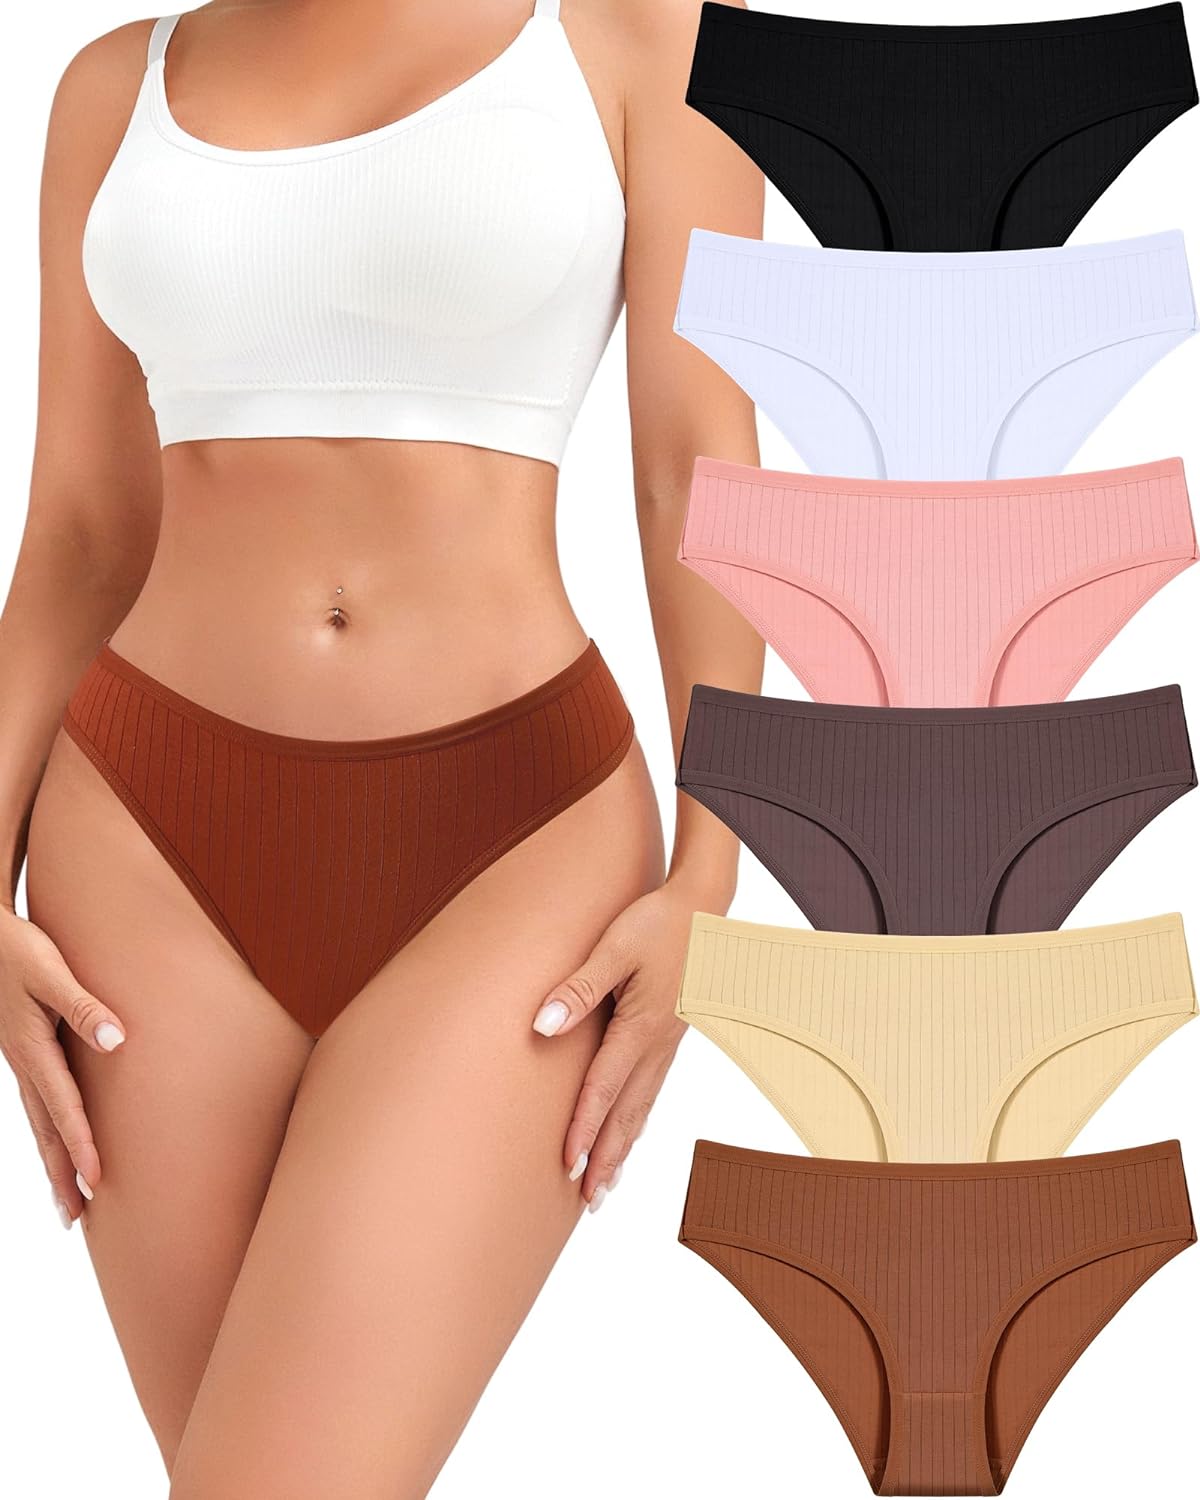 FINETOO 9 Pack Cotton Underwear for Women Sexy Low Cambodia